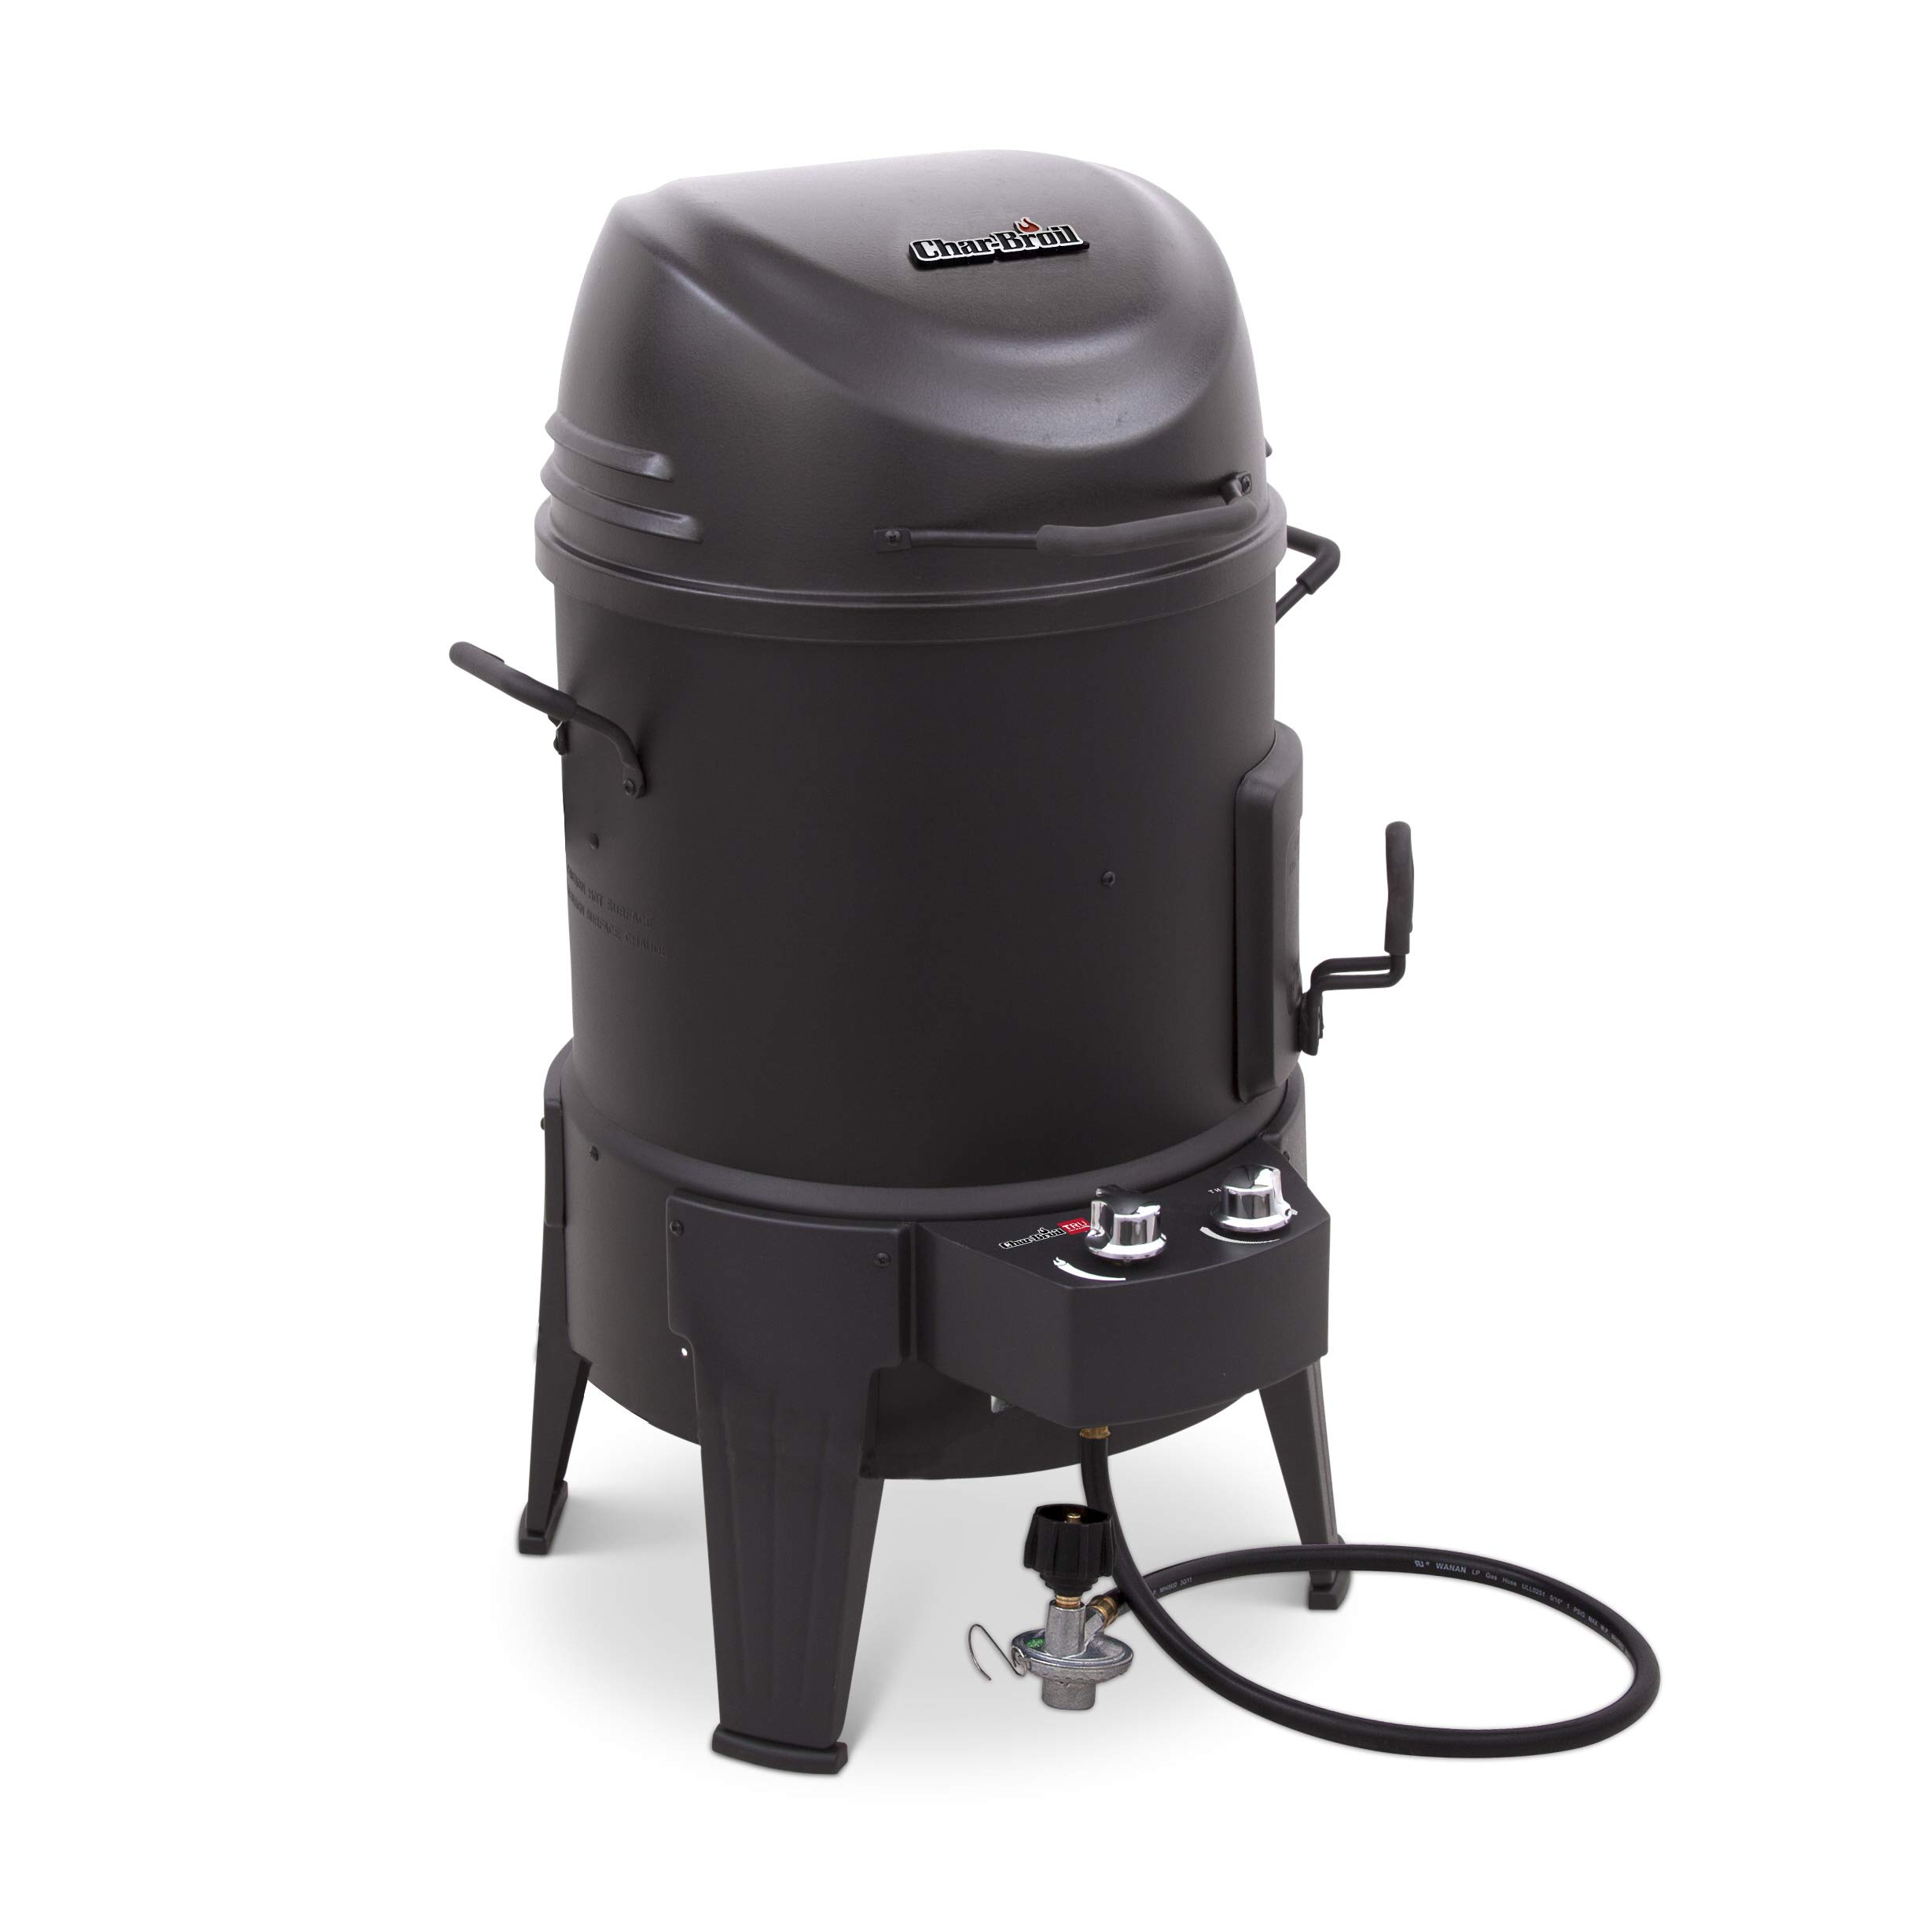 Charbroil® The Big Easy TRU-Infrared Cooking Technology 3-in-1 Propane Gas Stainless Steel Smoker, Roaster & Grill